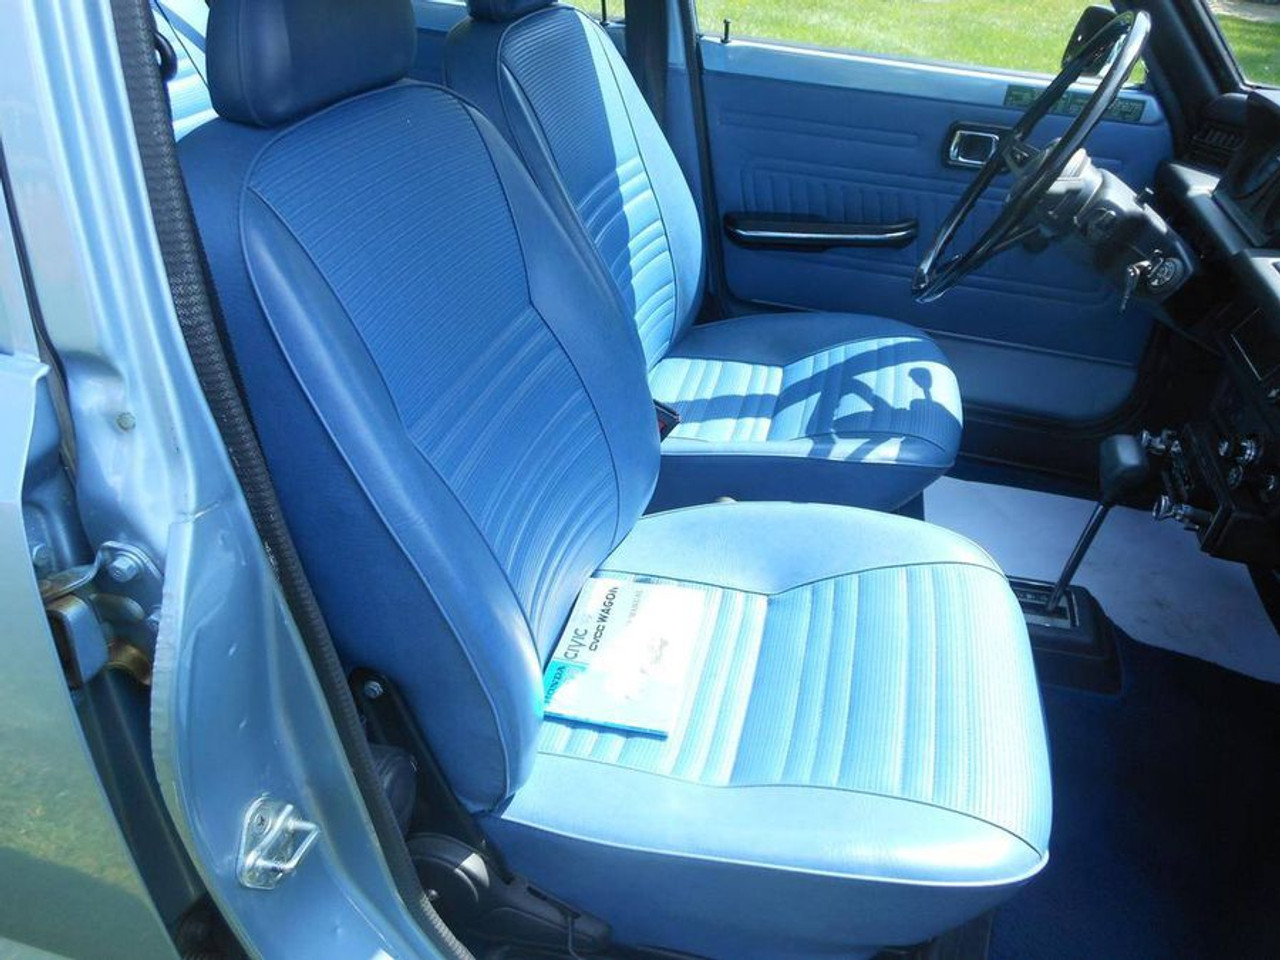 DURAFIT SEAT COVERS - 3001 Hwy 157 N, Mansfield, Texas - Auto Upholstery -  Phone Number - Yelp